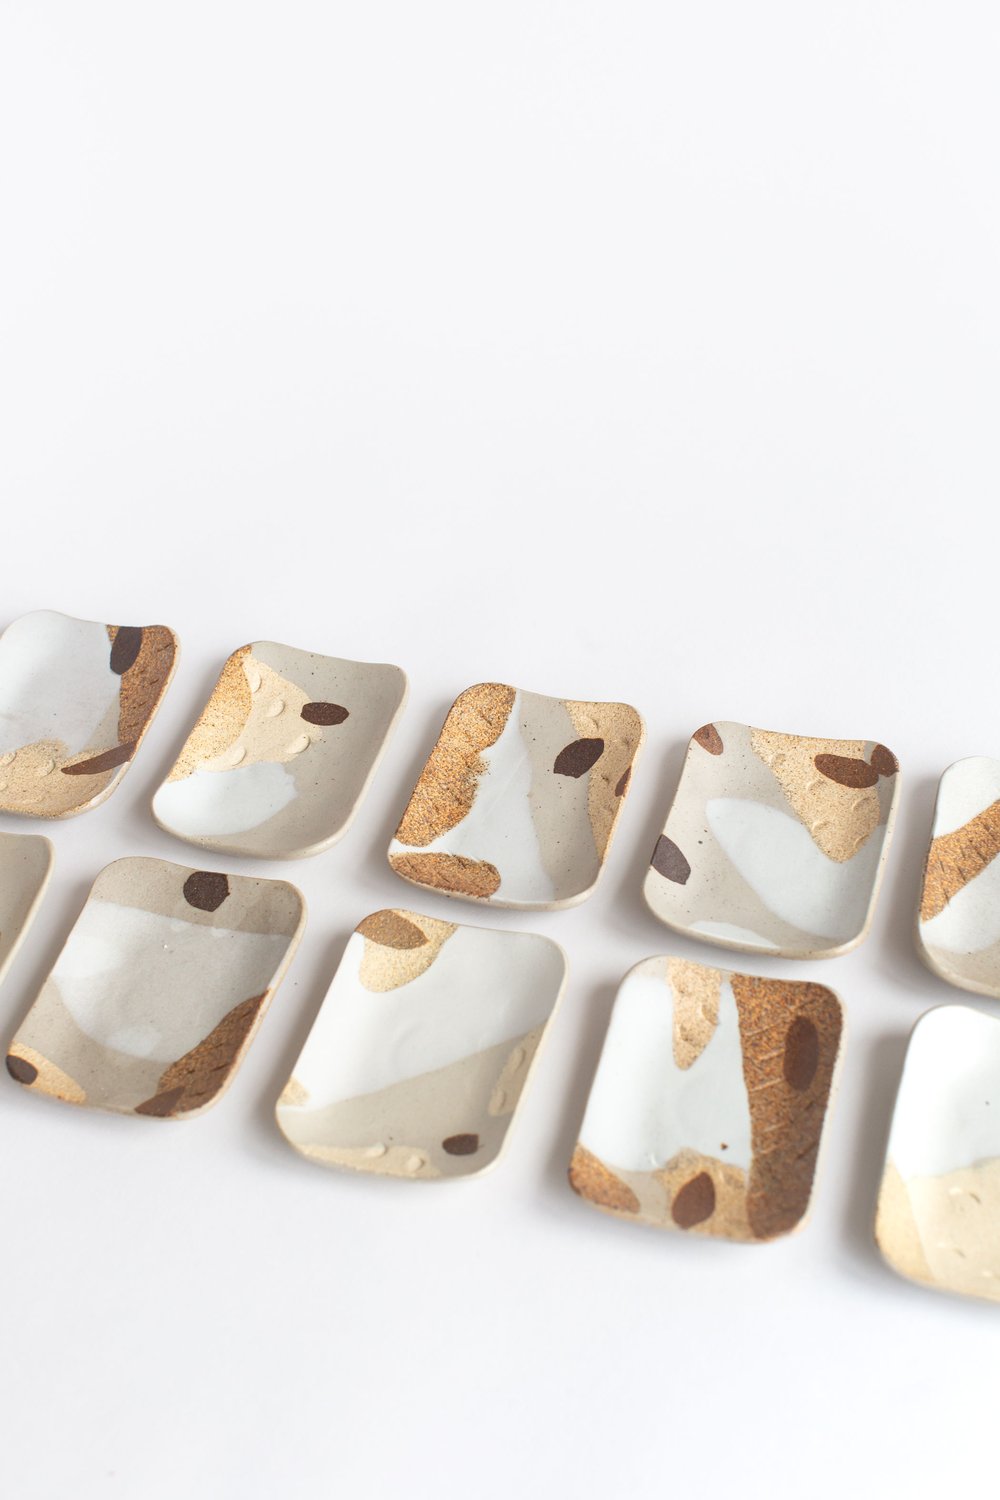 Image of Natural Sand Porcelain Inlay Soap Dishes